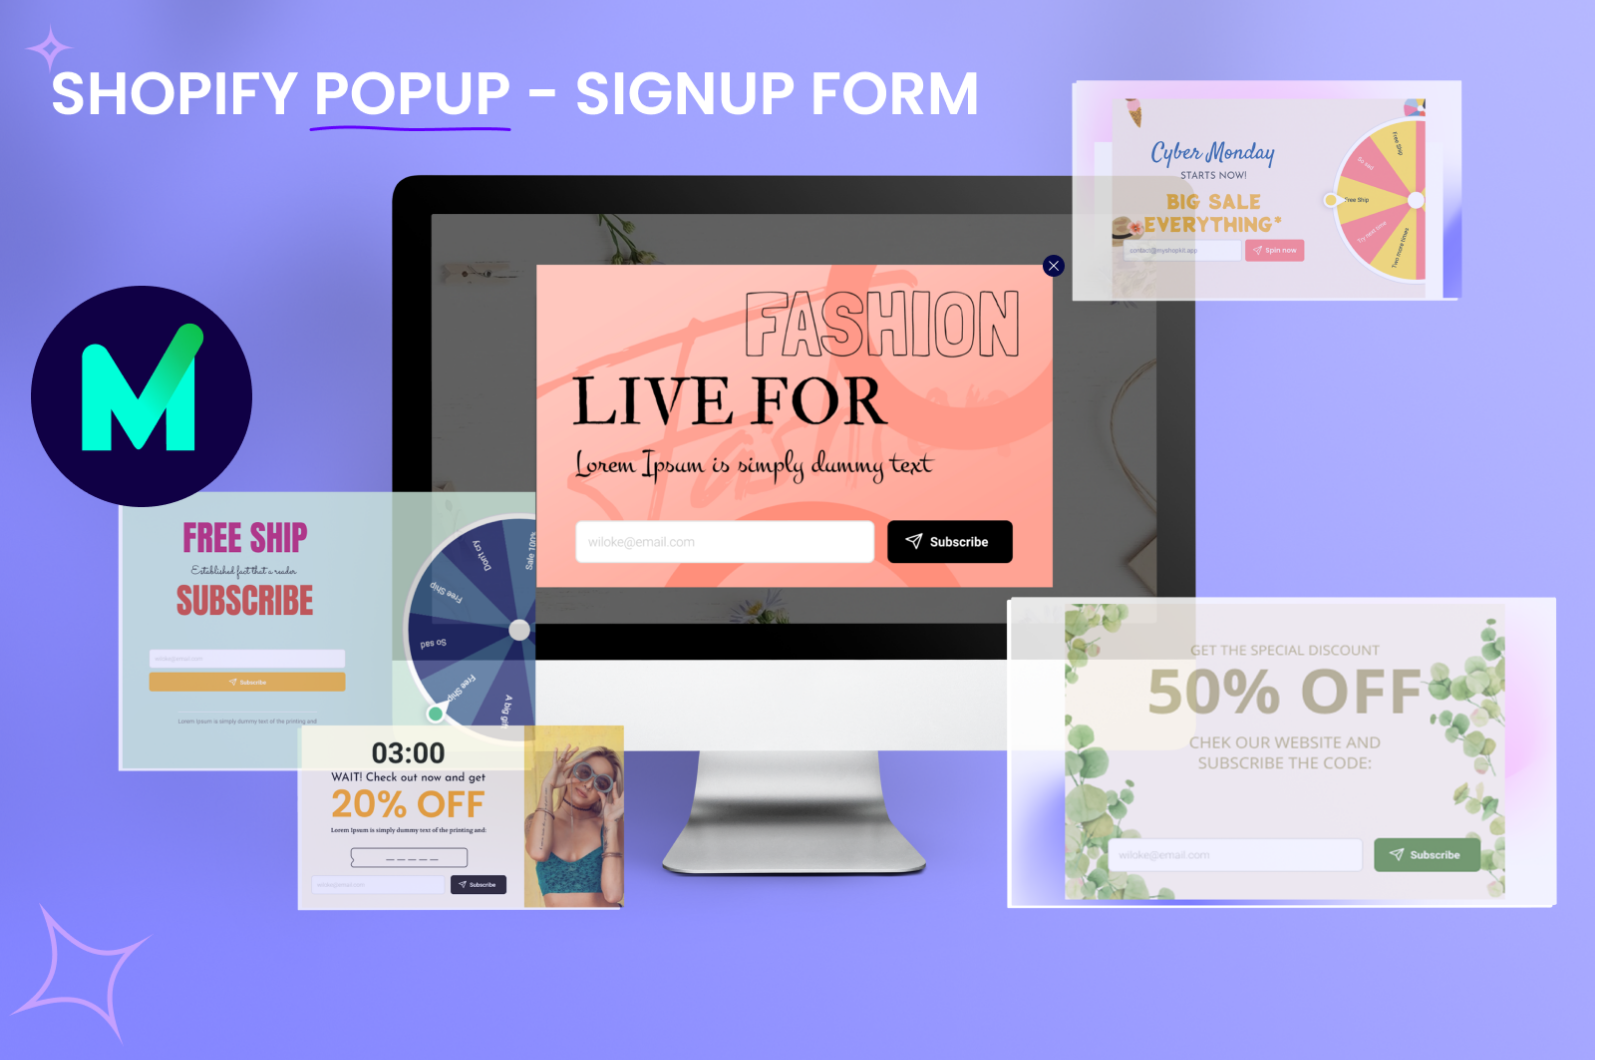 Shopify-popup-signup-form